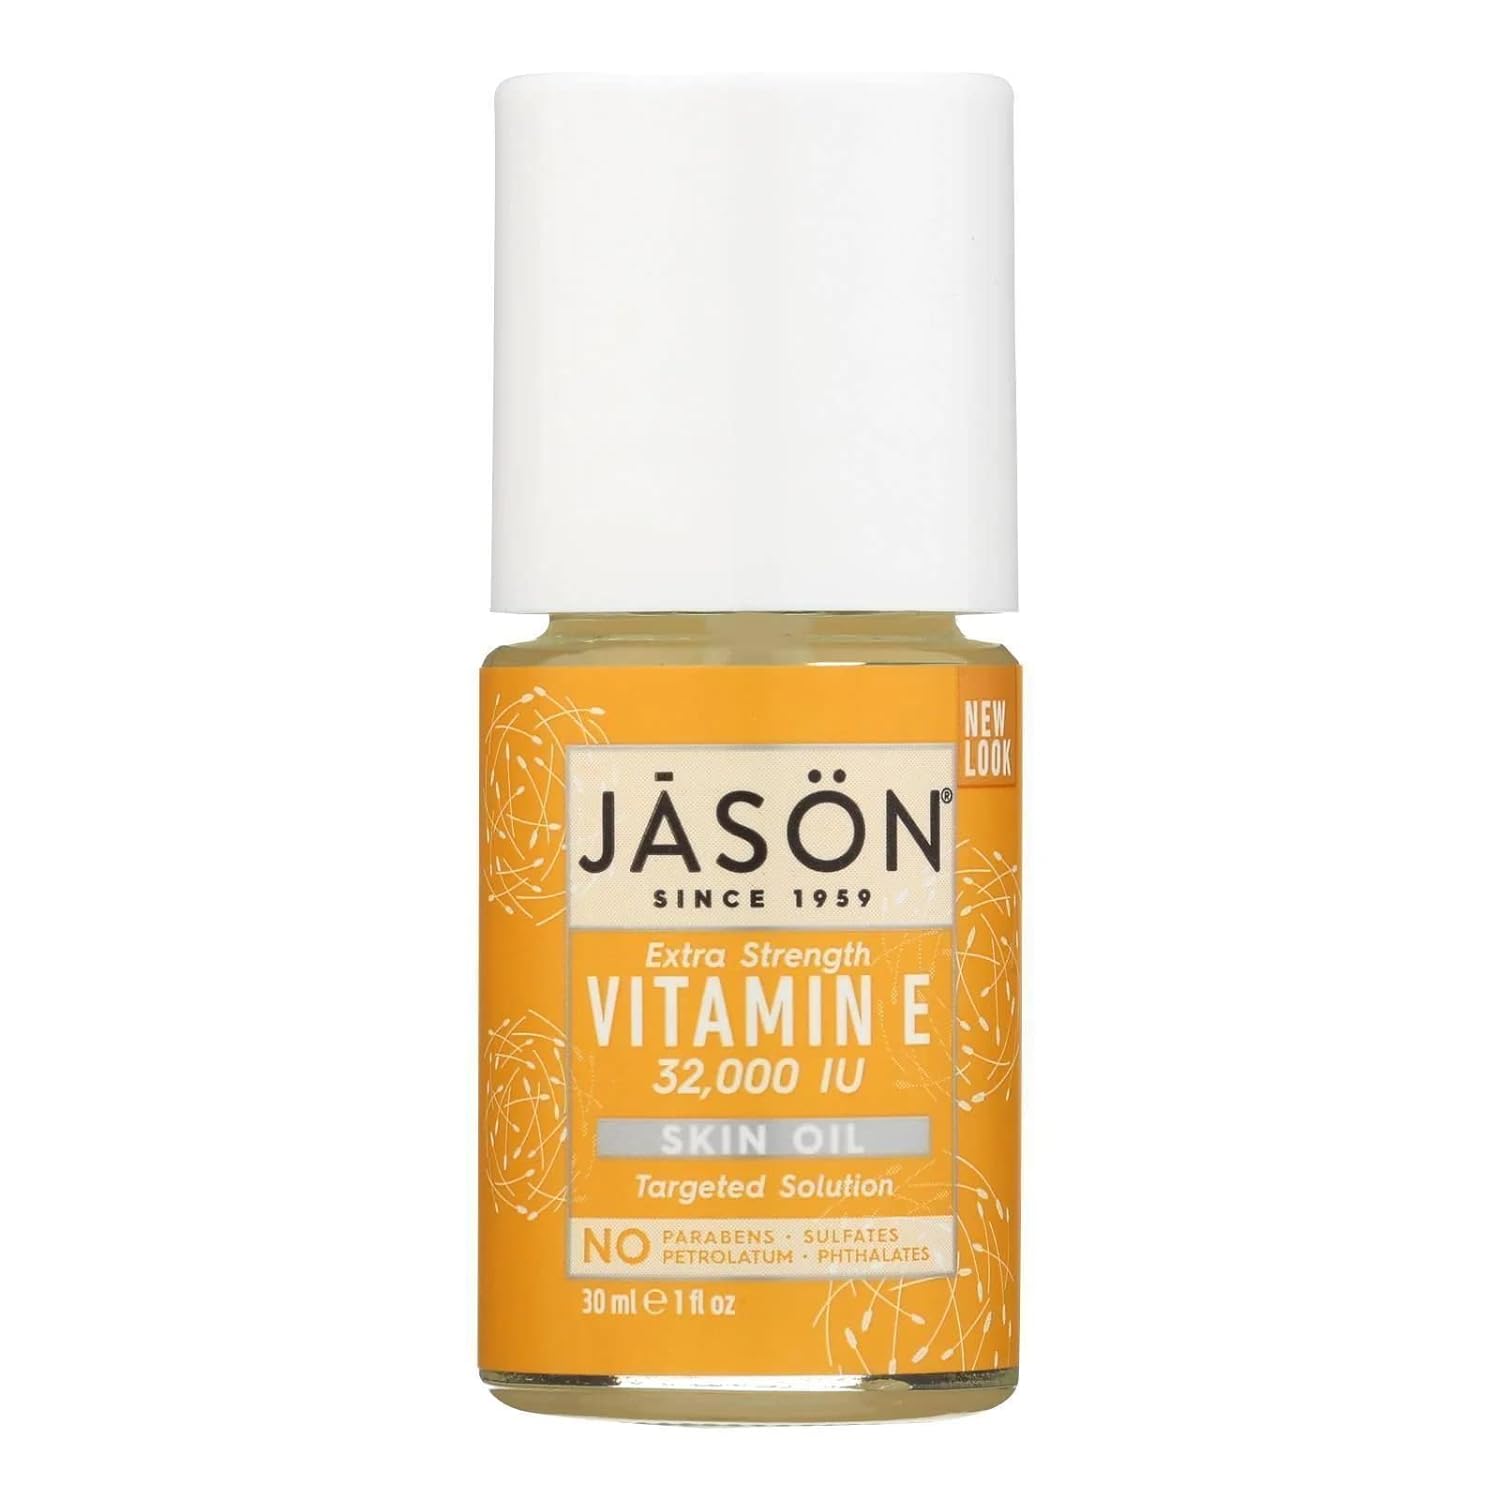 Jason Skin Oil, Extra Strength Vitamin E 32,000 IU, Targeted Solution, 1 Oz (Packaging May Vary)